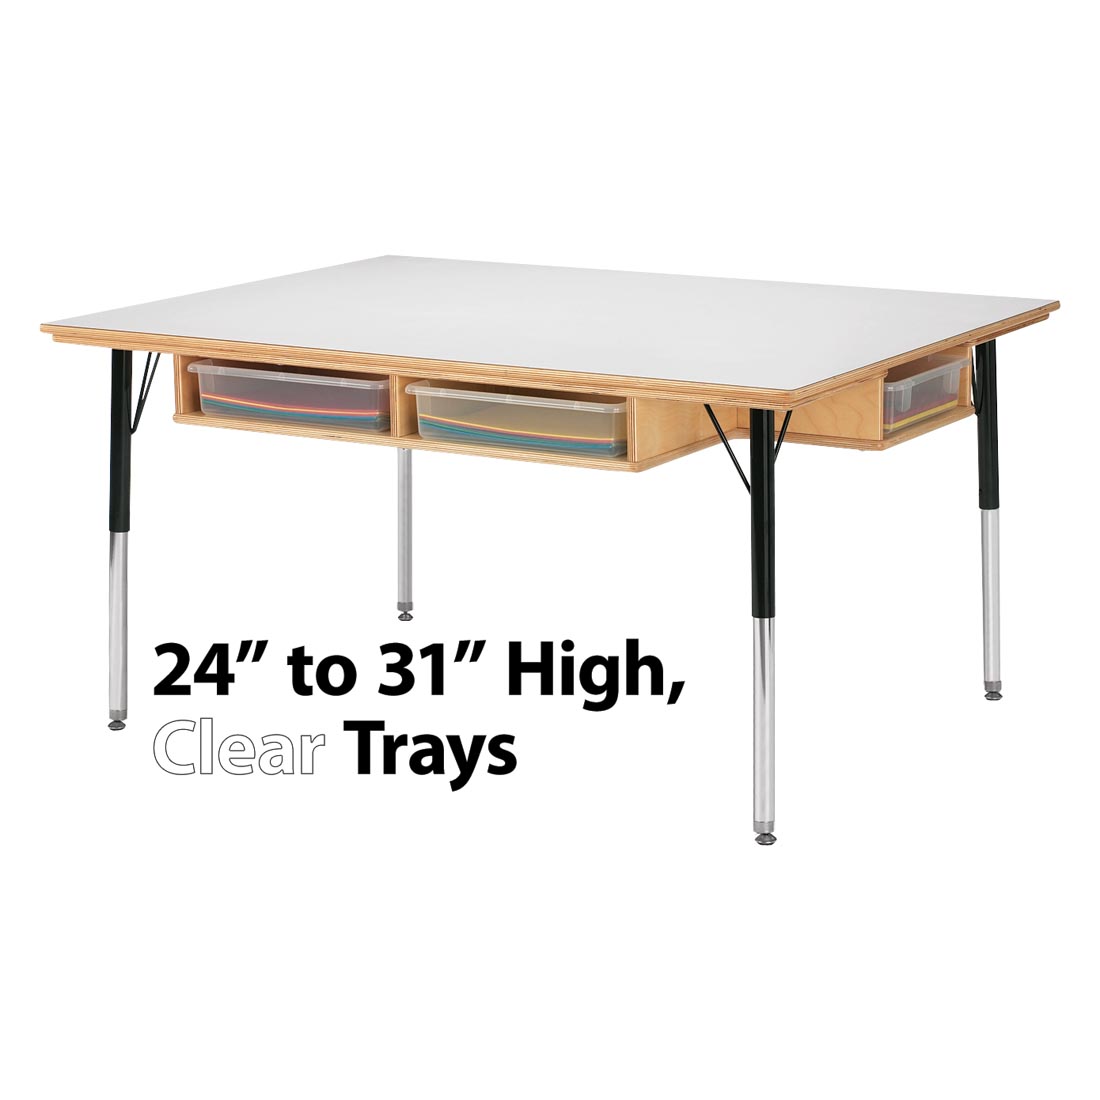 Table With Clear Storage Trays with the text 24" to 31" High, Clear Trays